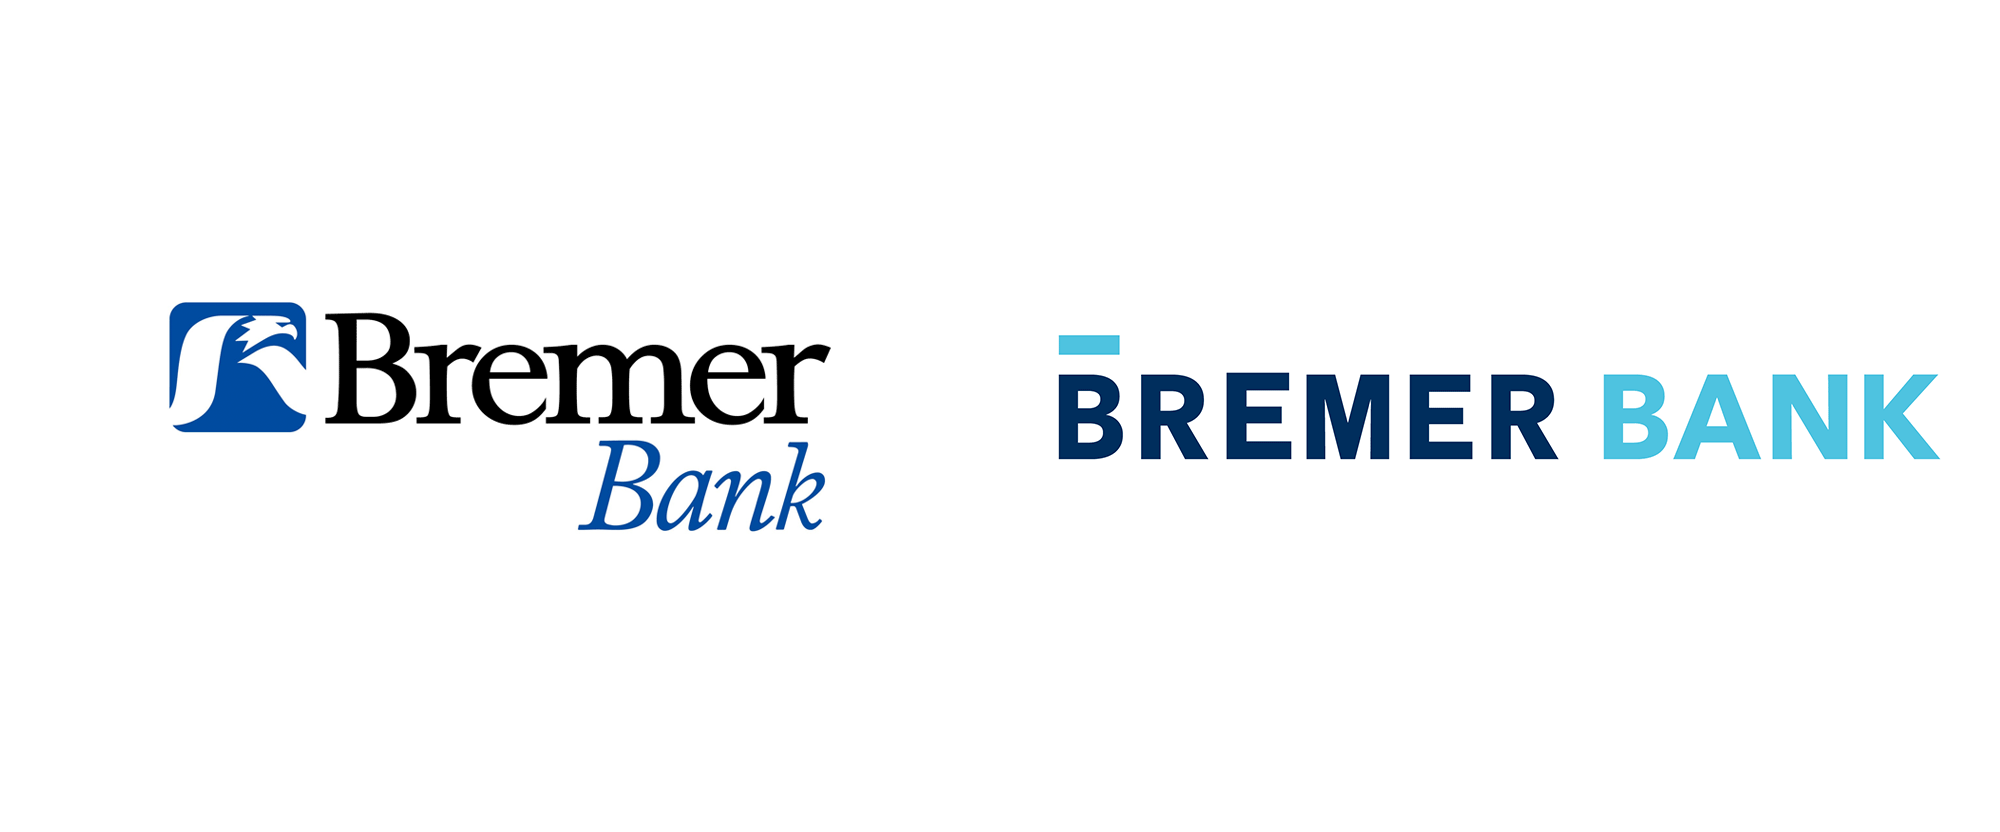 Www.bank Logo - Brand New: New Logo and Identity for Bremer Bank by Little